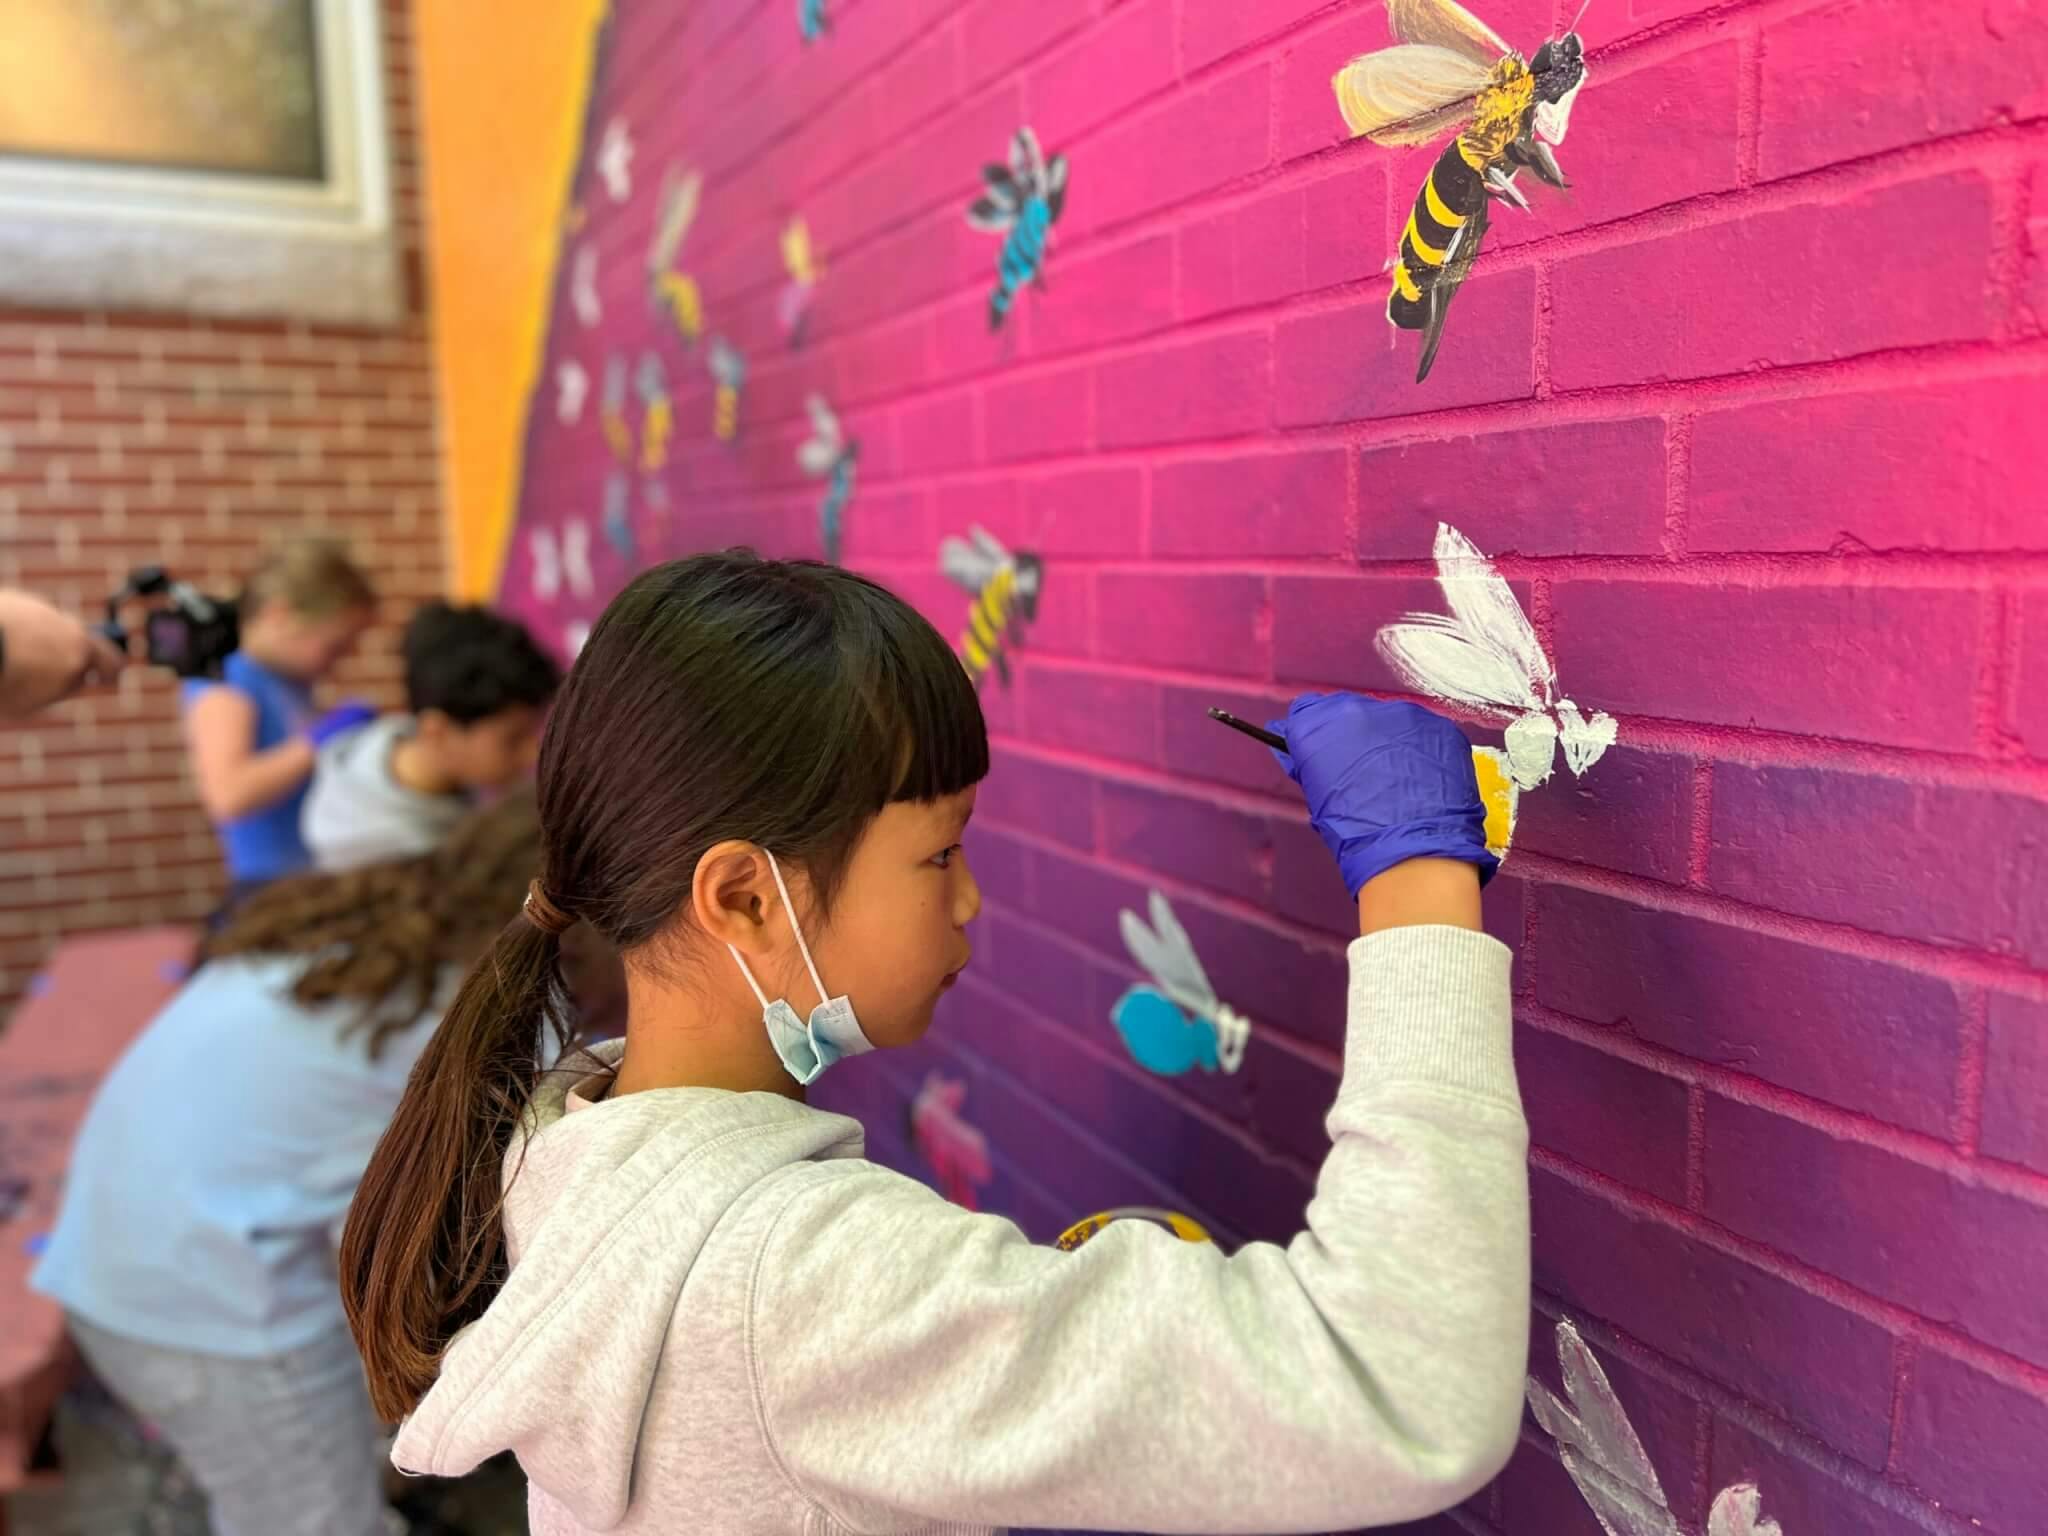 A young girl wearing a white sweatshirt paints bees on a bright pink wall.